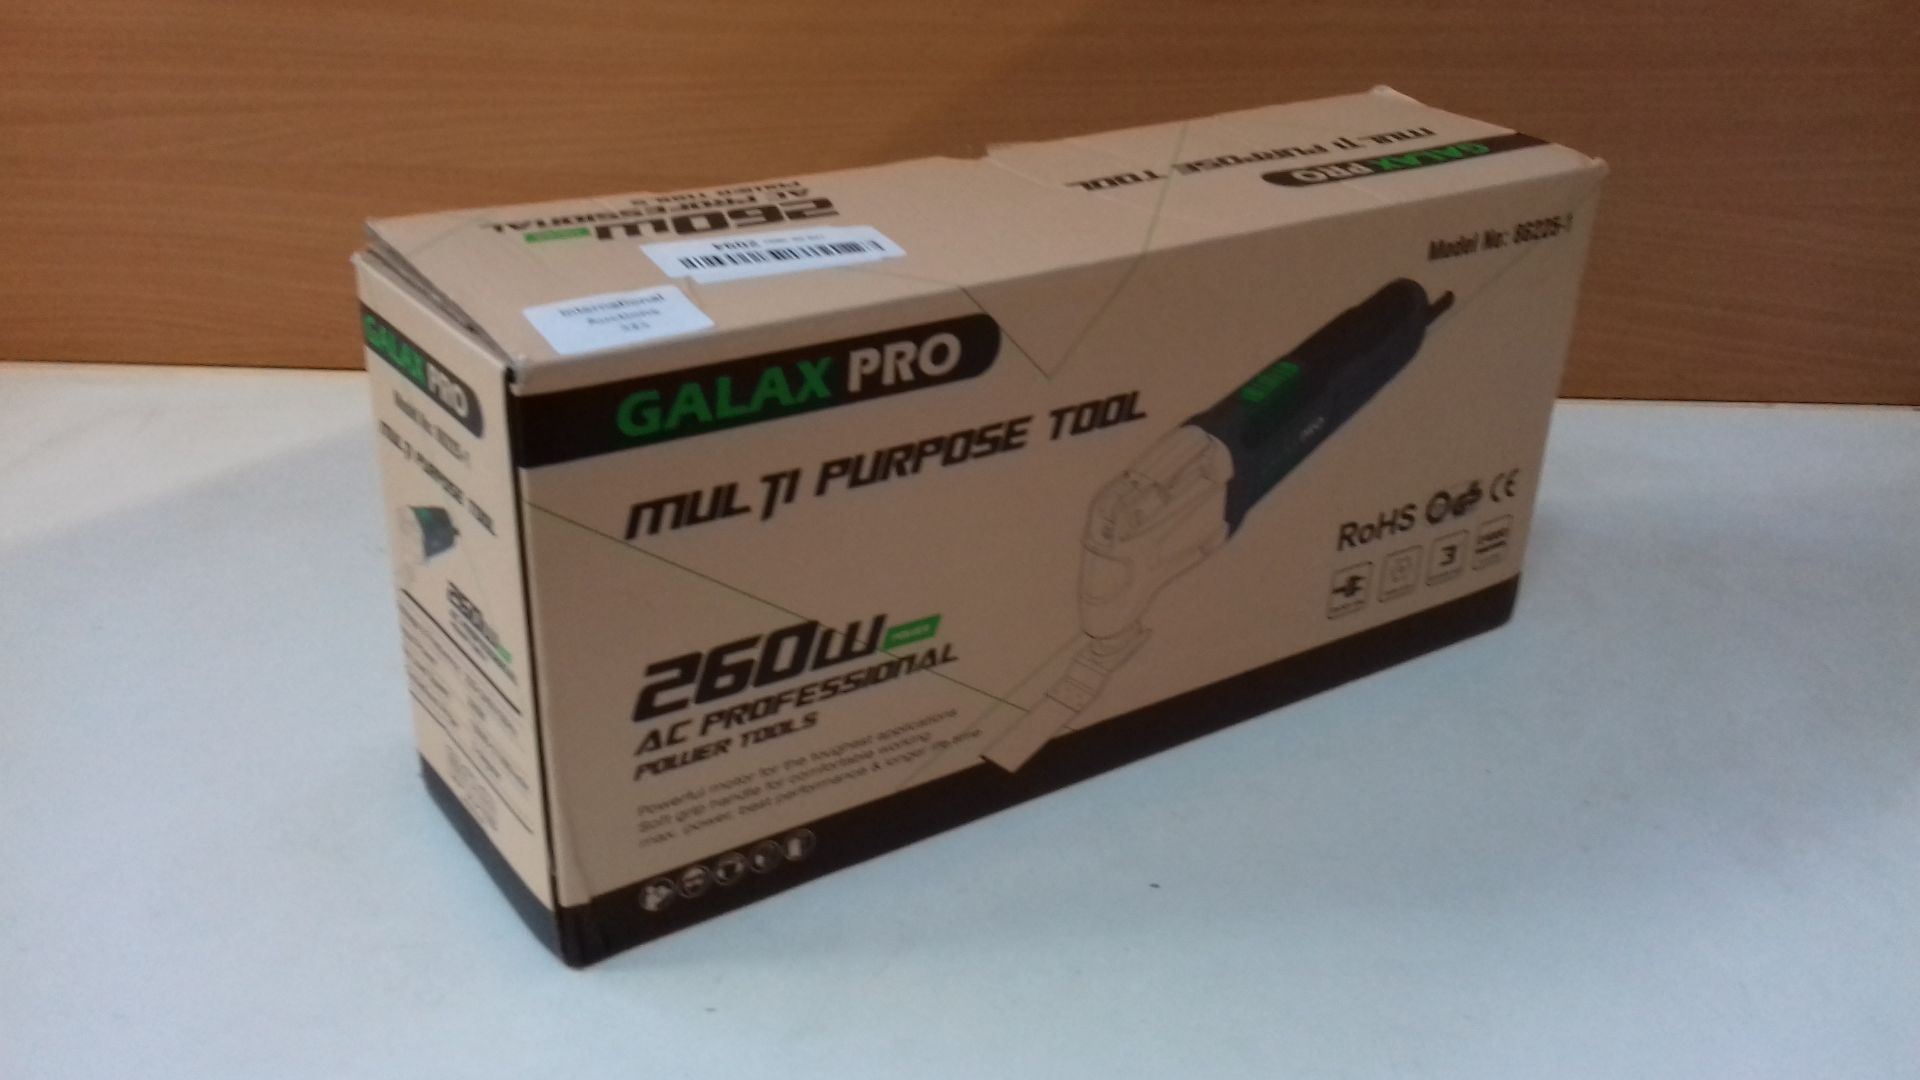 RRP £79.99 GALAX PRO Oscillating Tool - Image 2 of 2